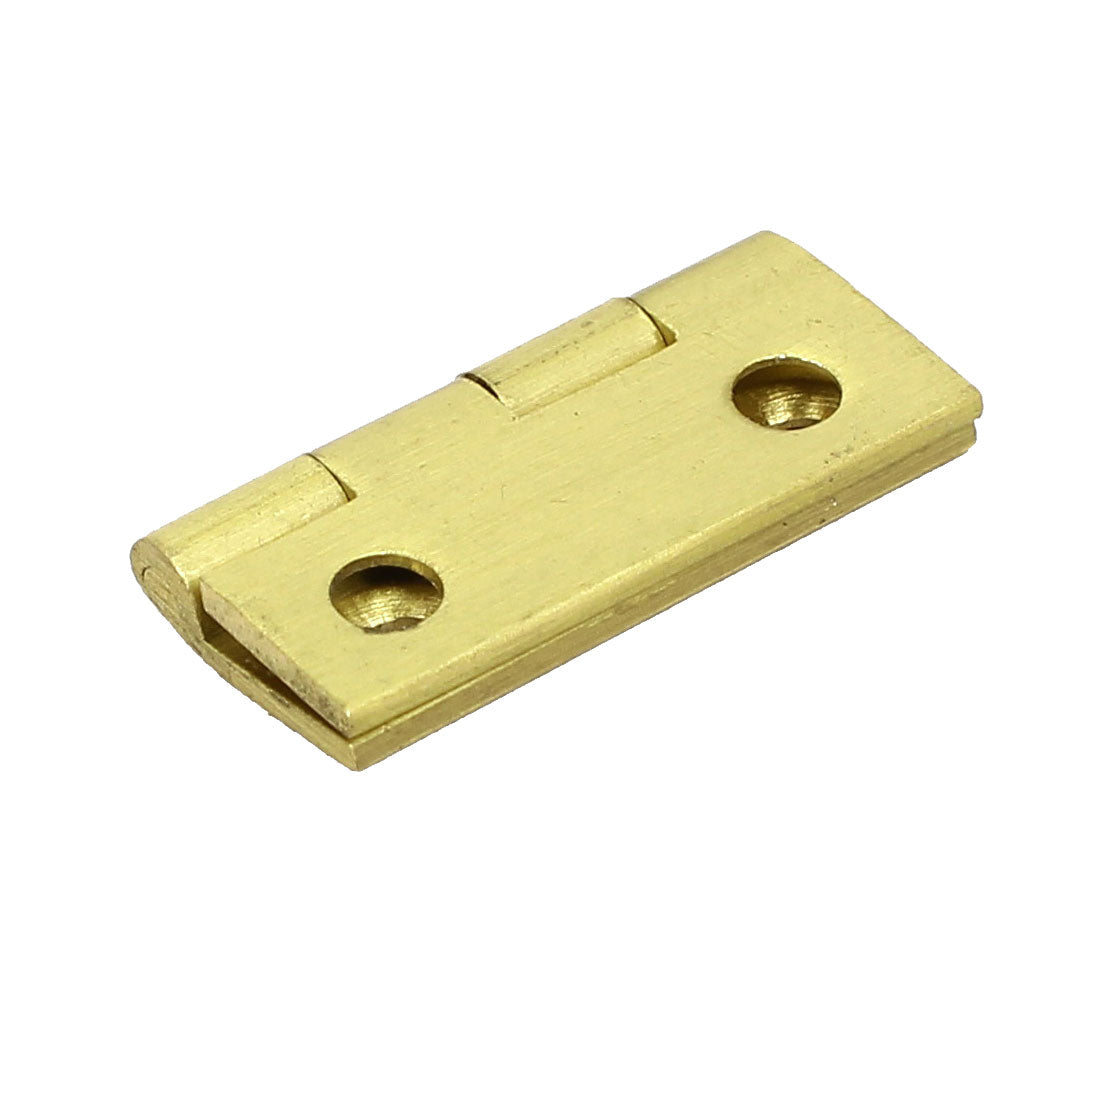 uxcell Uxcell Jewelry Box Brass Bearing Door Hinge Gold Tone 25mm 1-inch Length